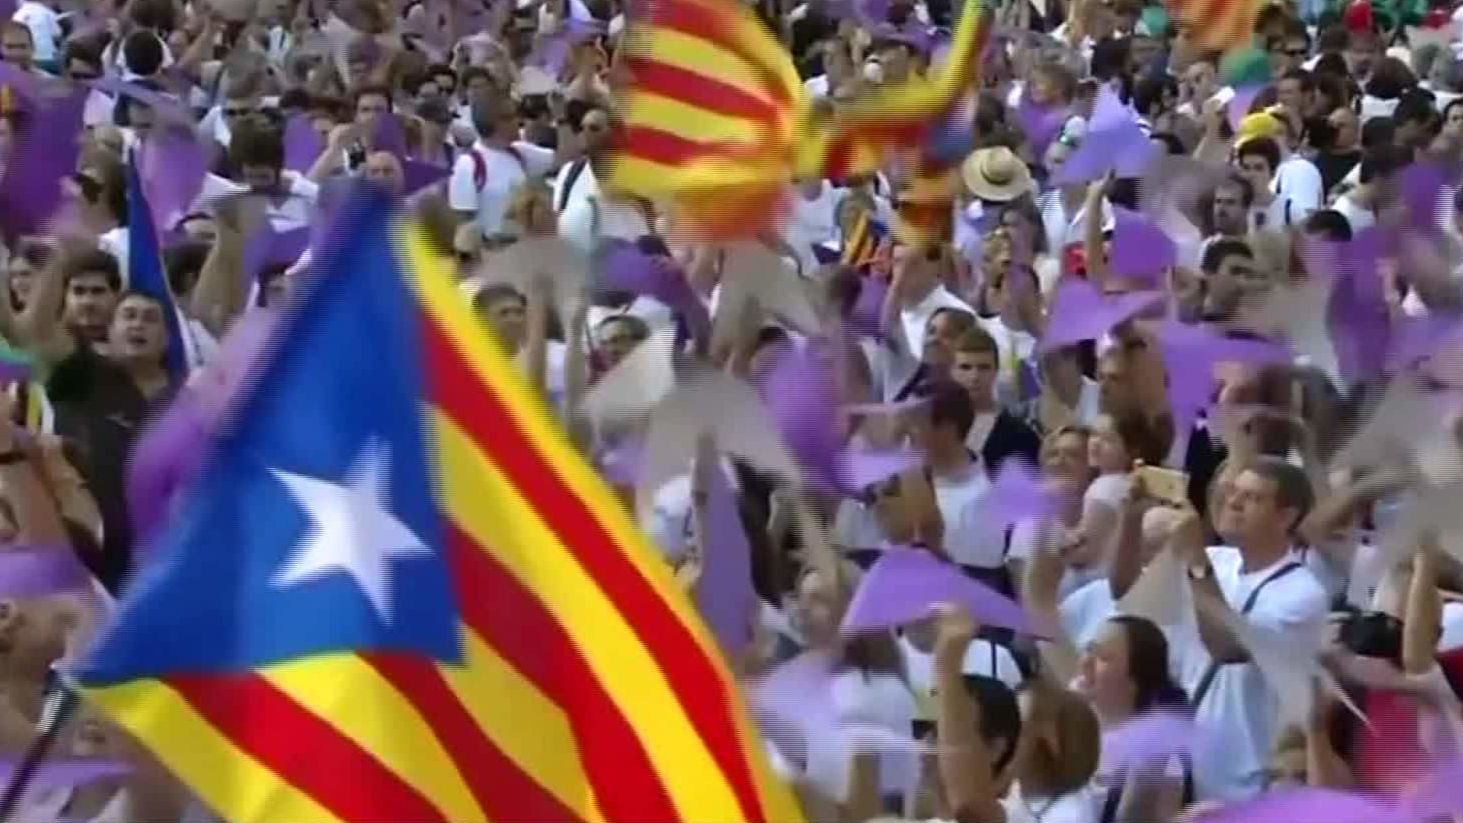 The turnout was the highest in Catalan elections since Spain became a democracy in the 1970s.